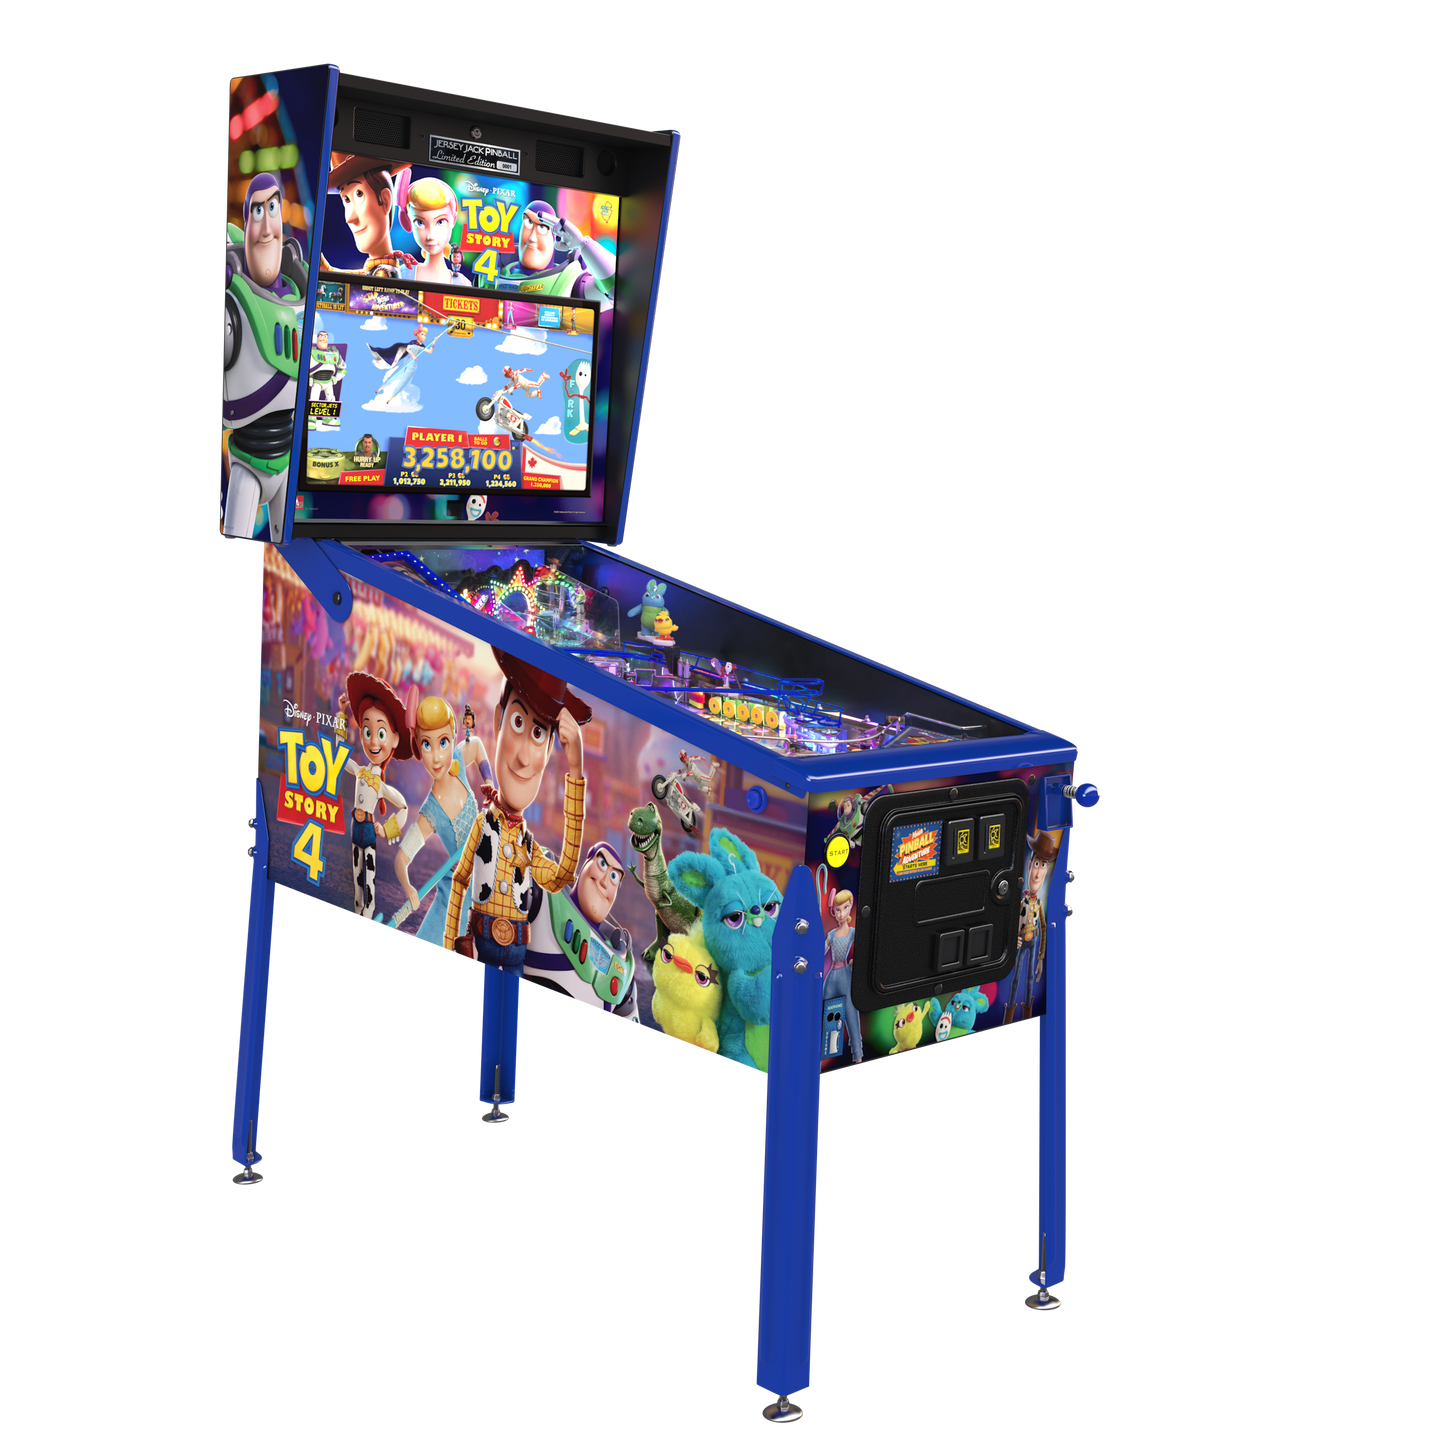 TOY STORY 4 LE - Jersey Jack Pinball